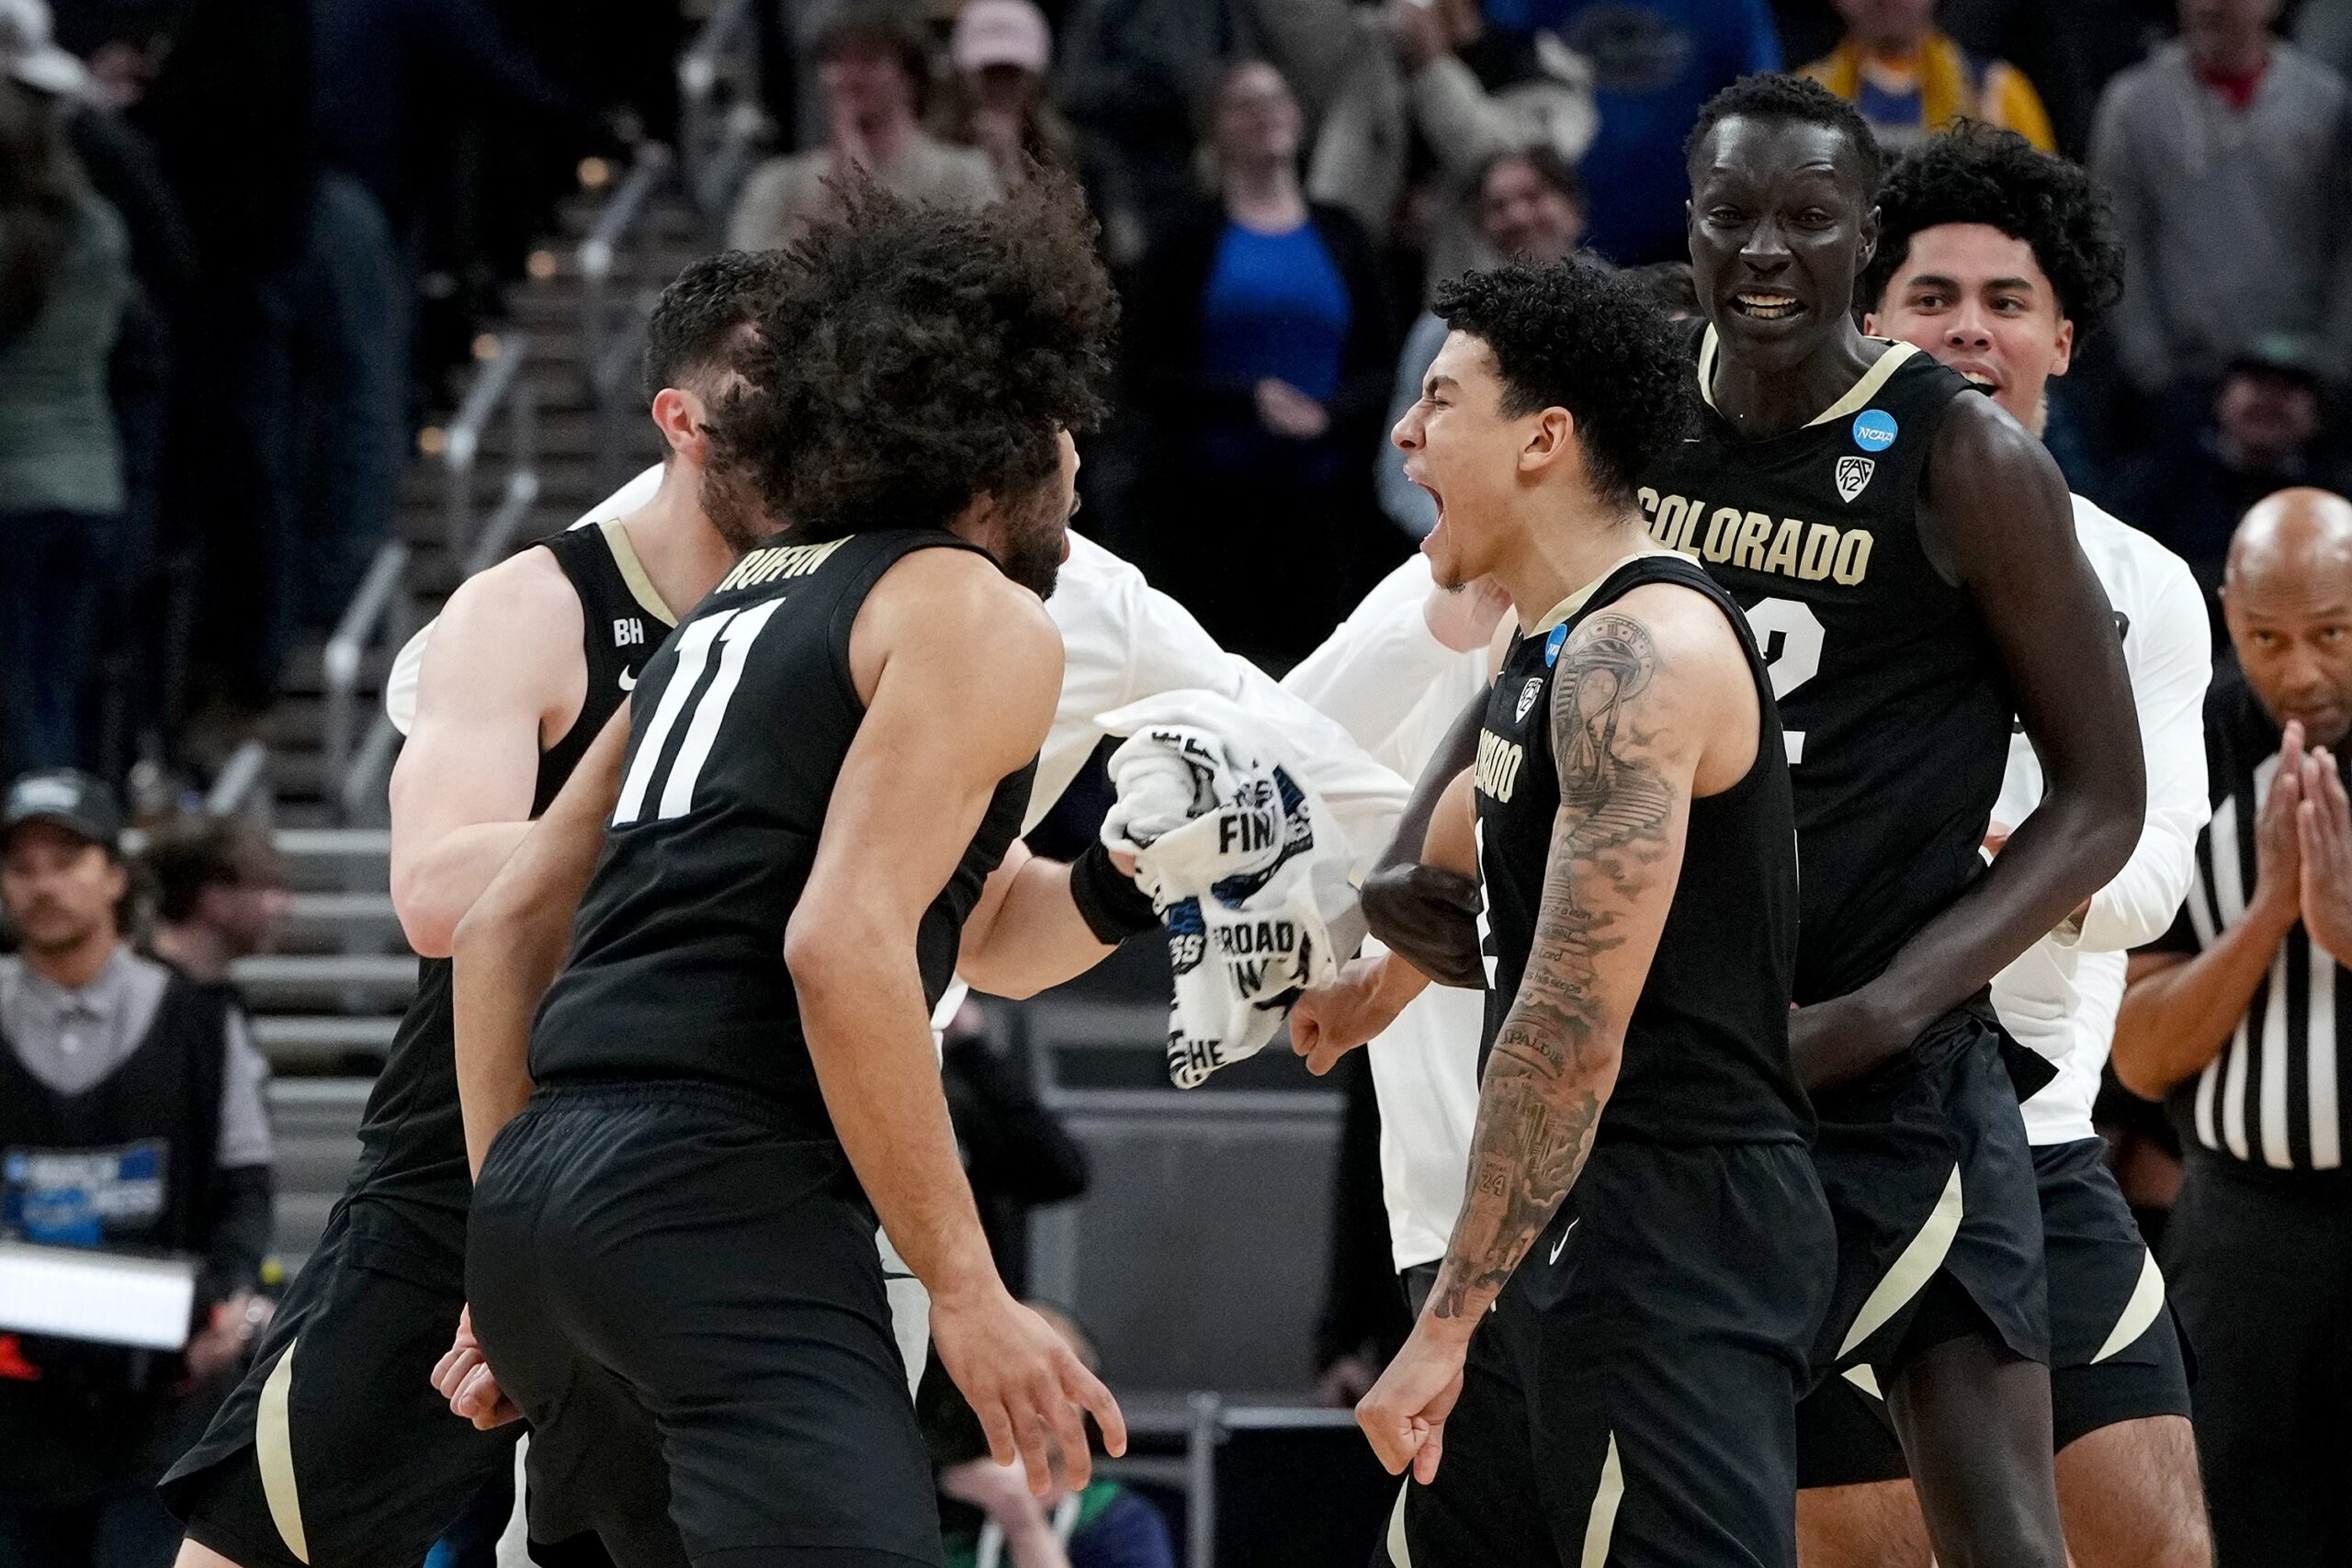 KJ Simpson #2 of the Colorado Buffaloes celebrates with his teammates after hitting the game-winning shot to defeat the Florida Gators in the first round of the NCAA Men's Basketball Tournament at Gainbridge Fieldhouse on March 22, 2024, in Indianapolis, Indiana.